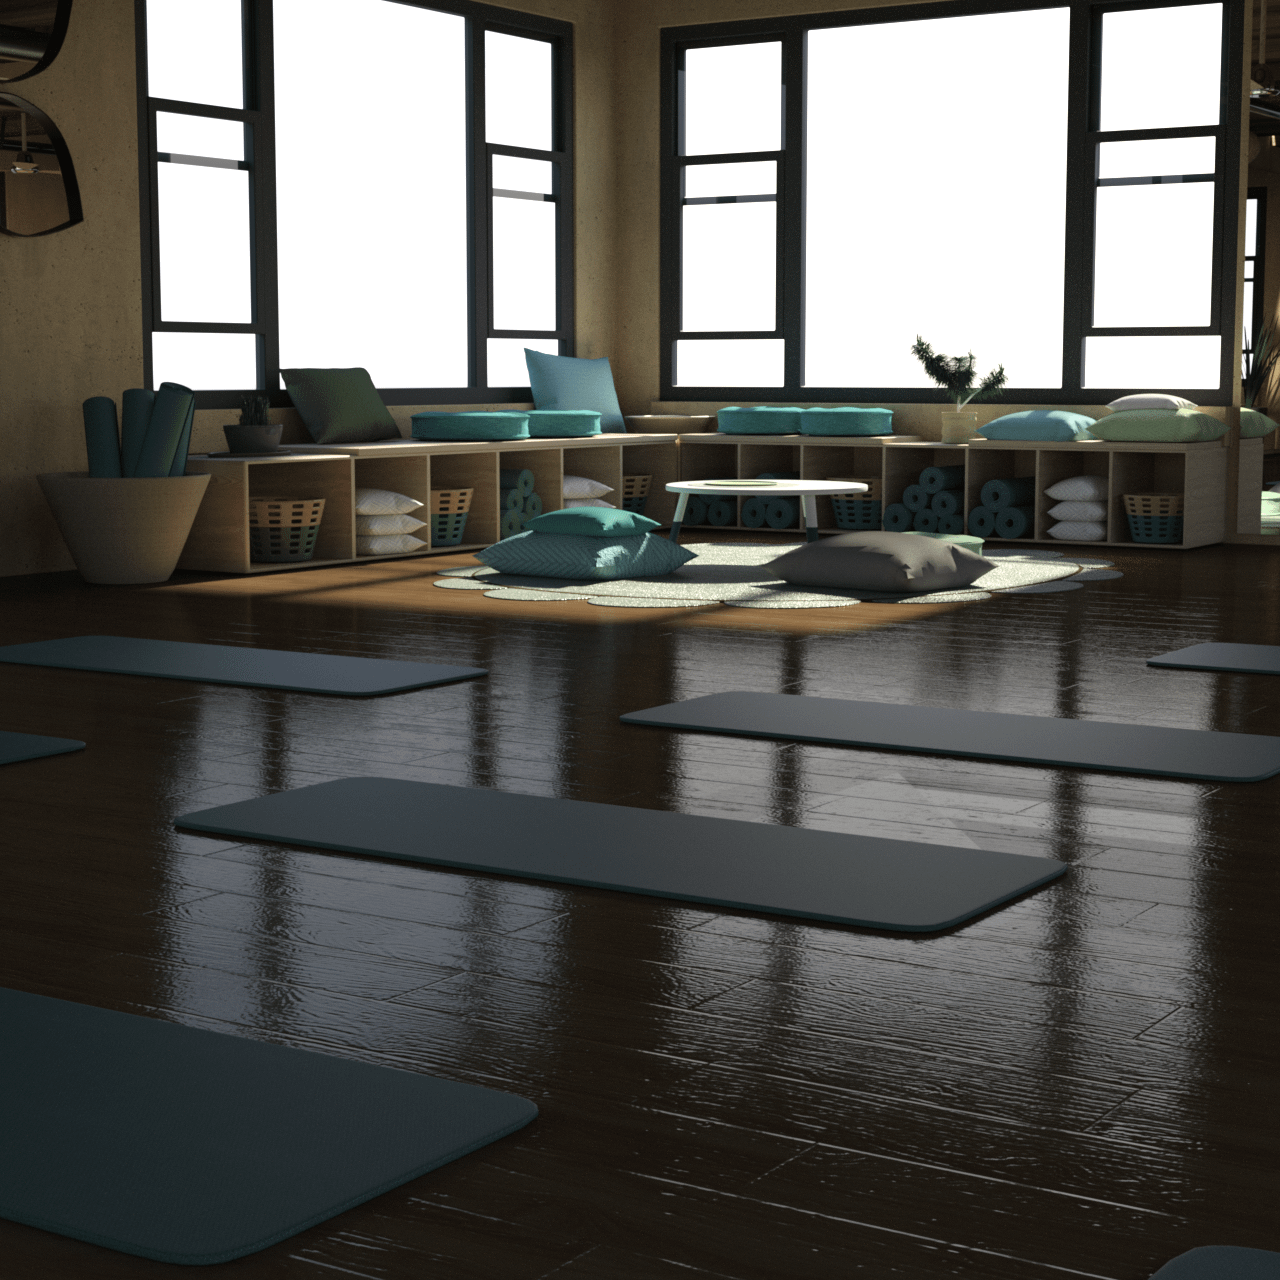 Showing other parts of the yoga studio